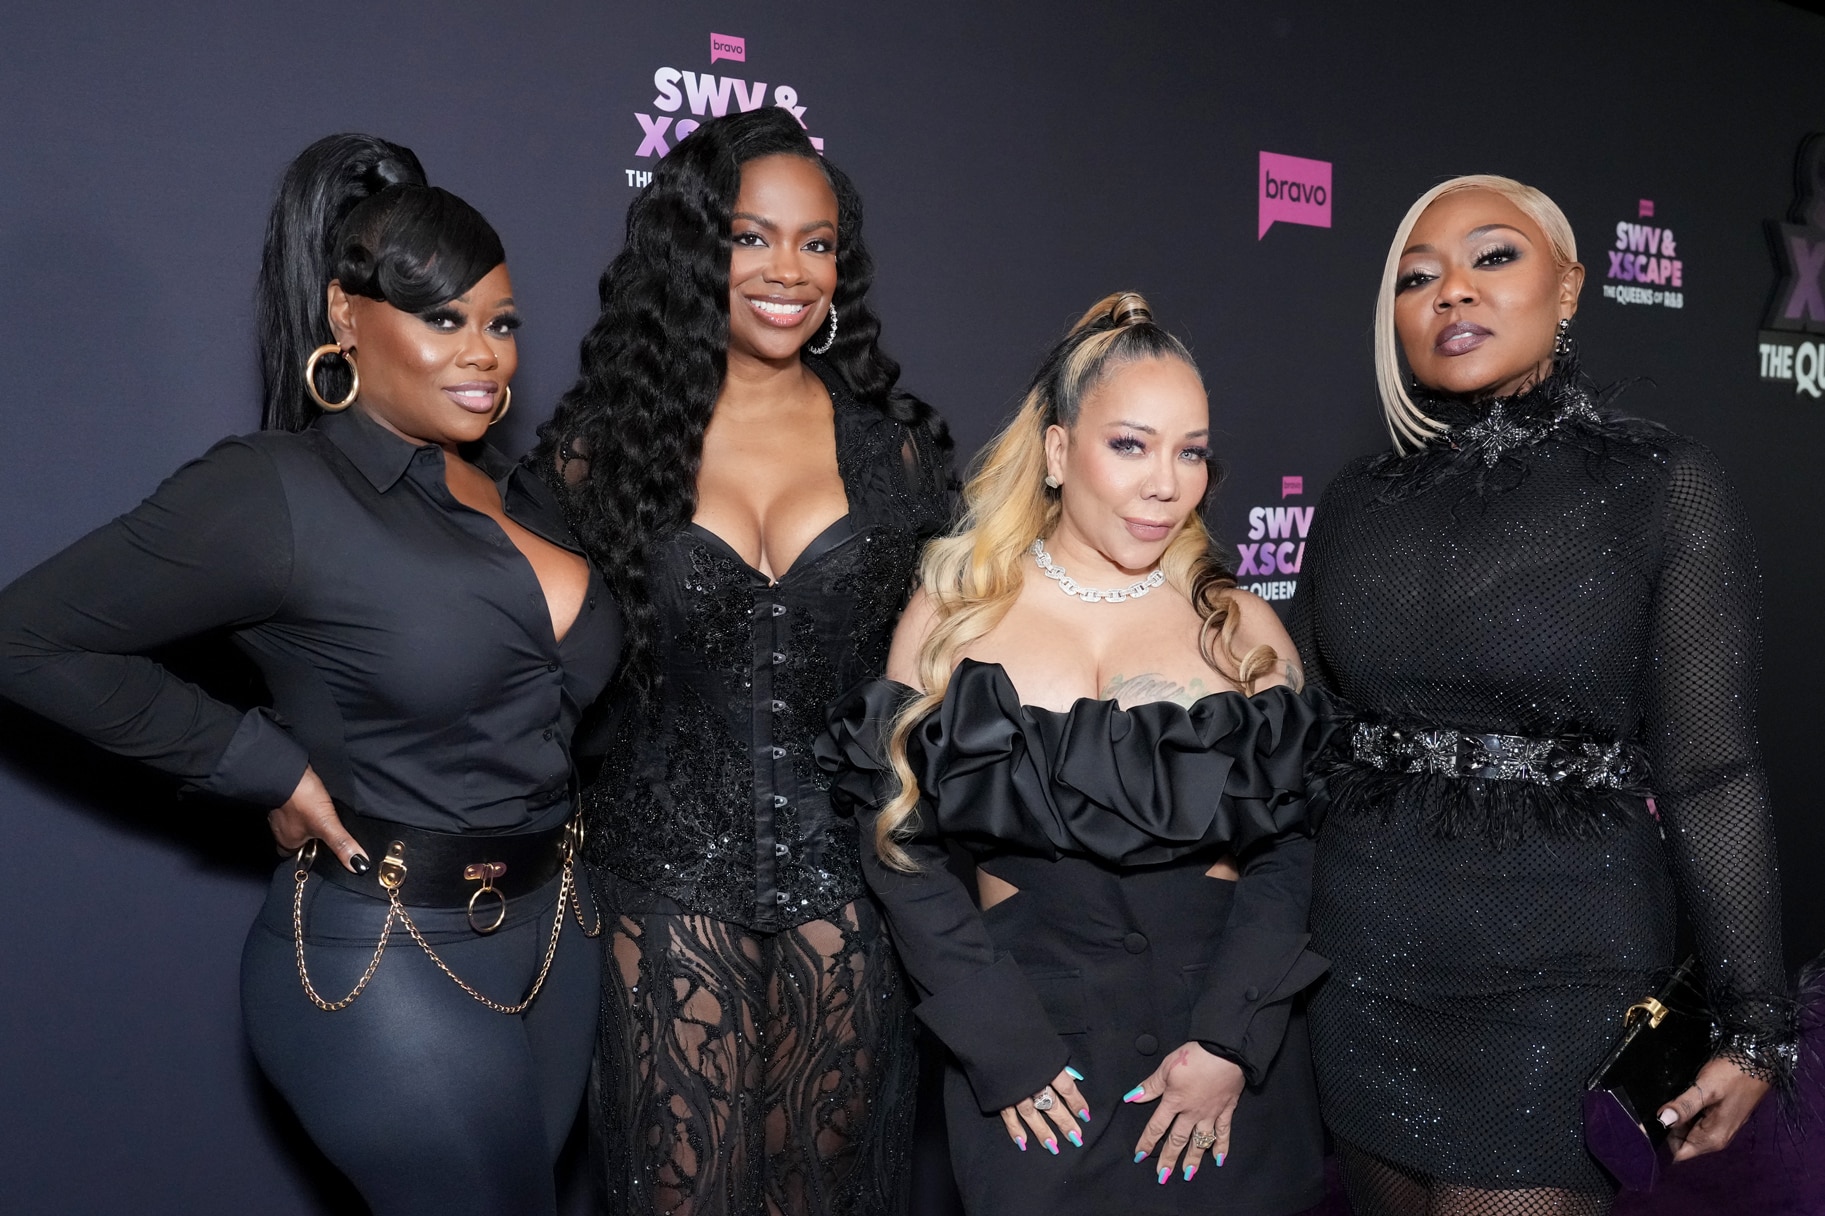 Xscape music group posing together at event